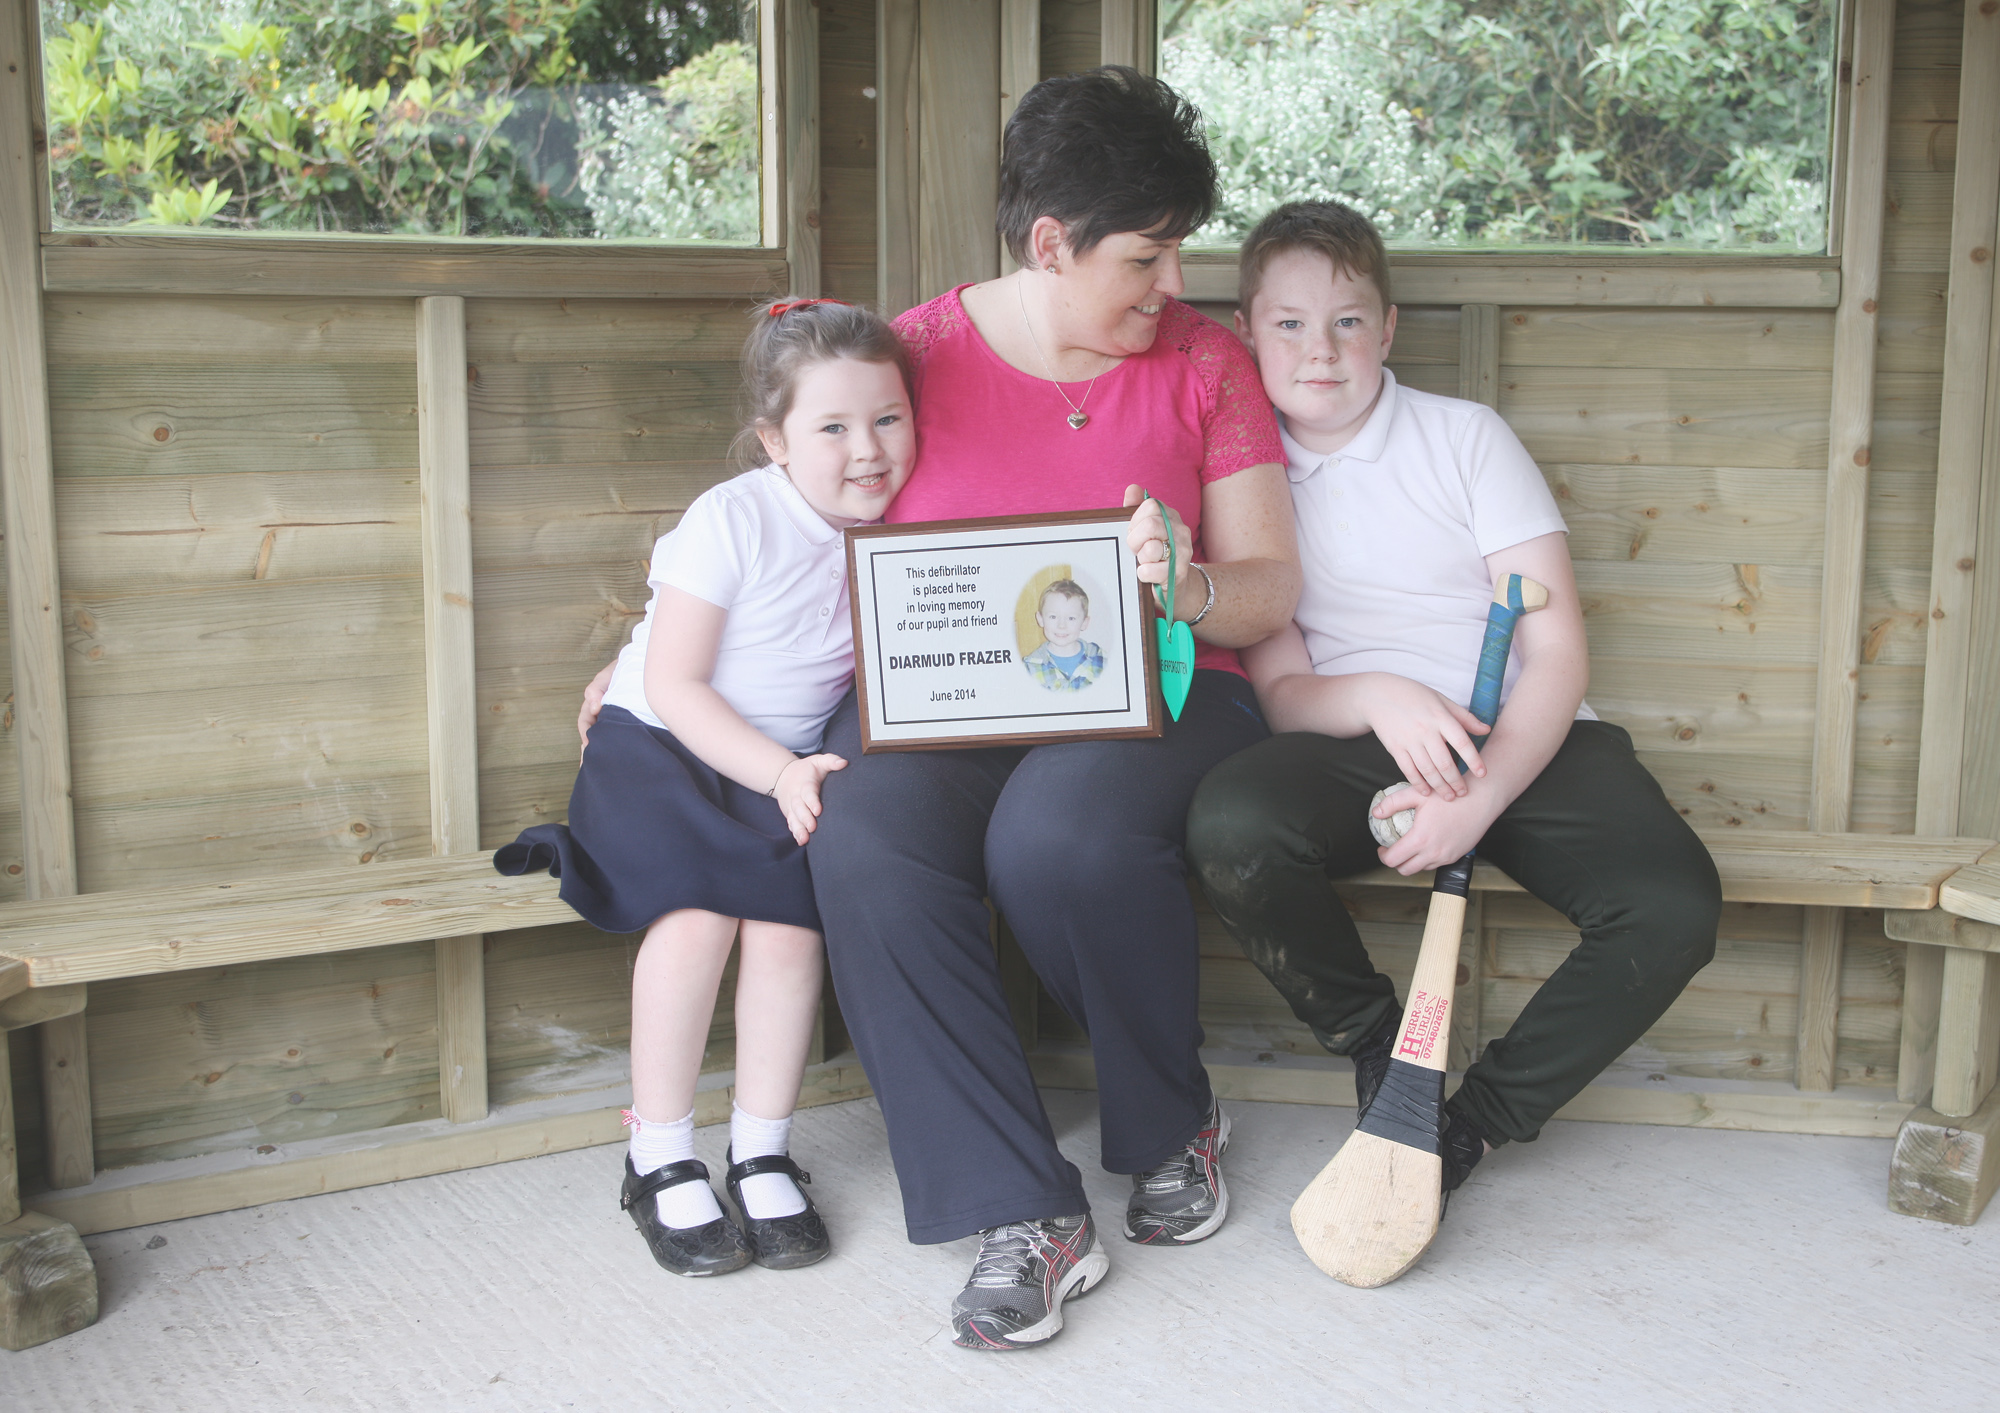 DIARMUID’S LEGACY: Tina Frazer, her son Cormac and daughter Orlaith in the new outdoor classroom